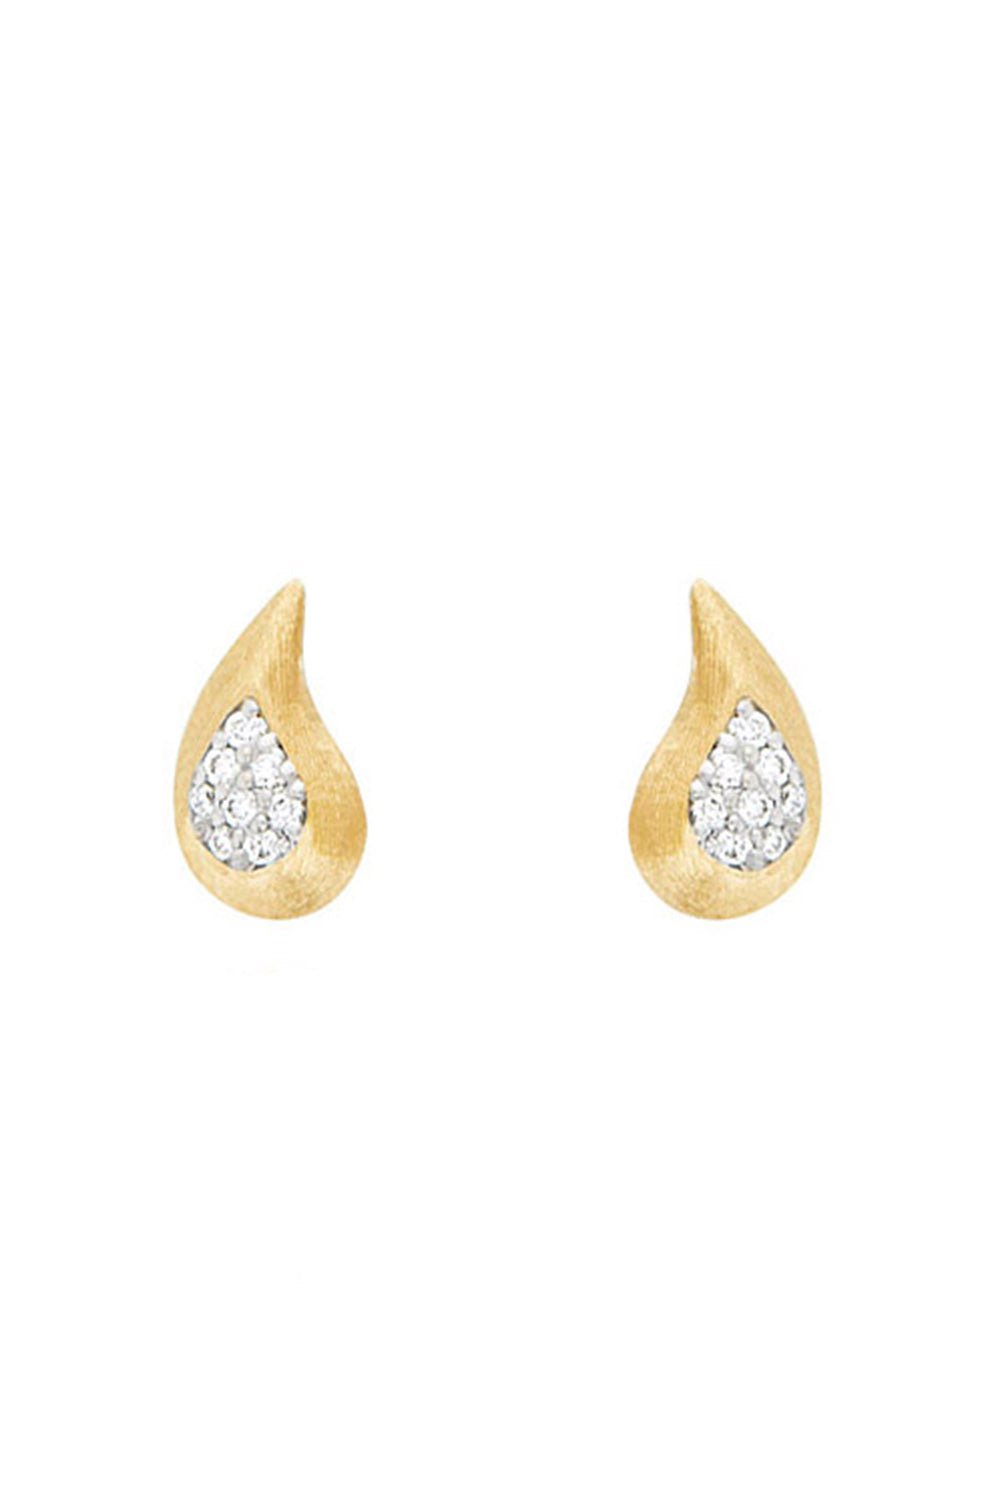 NANIS-Cachemire 3-in-1 Earrings-YELLOW GOLD